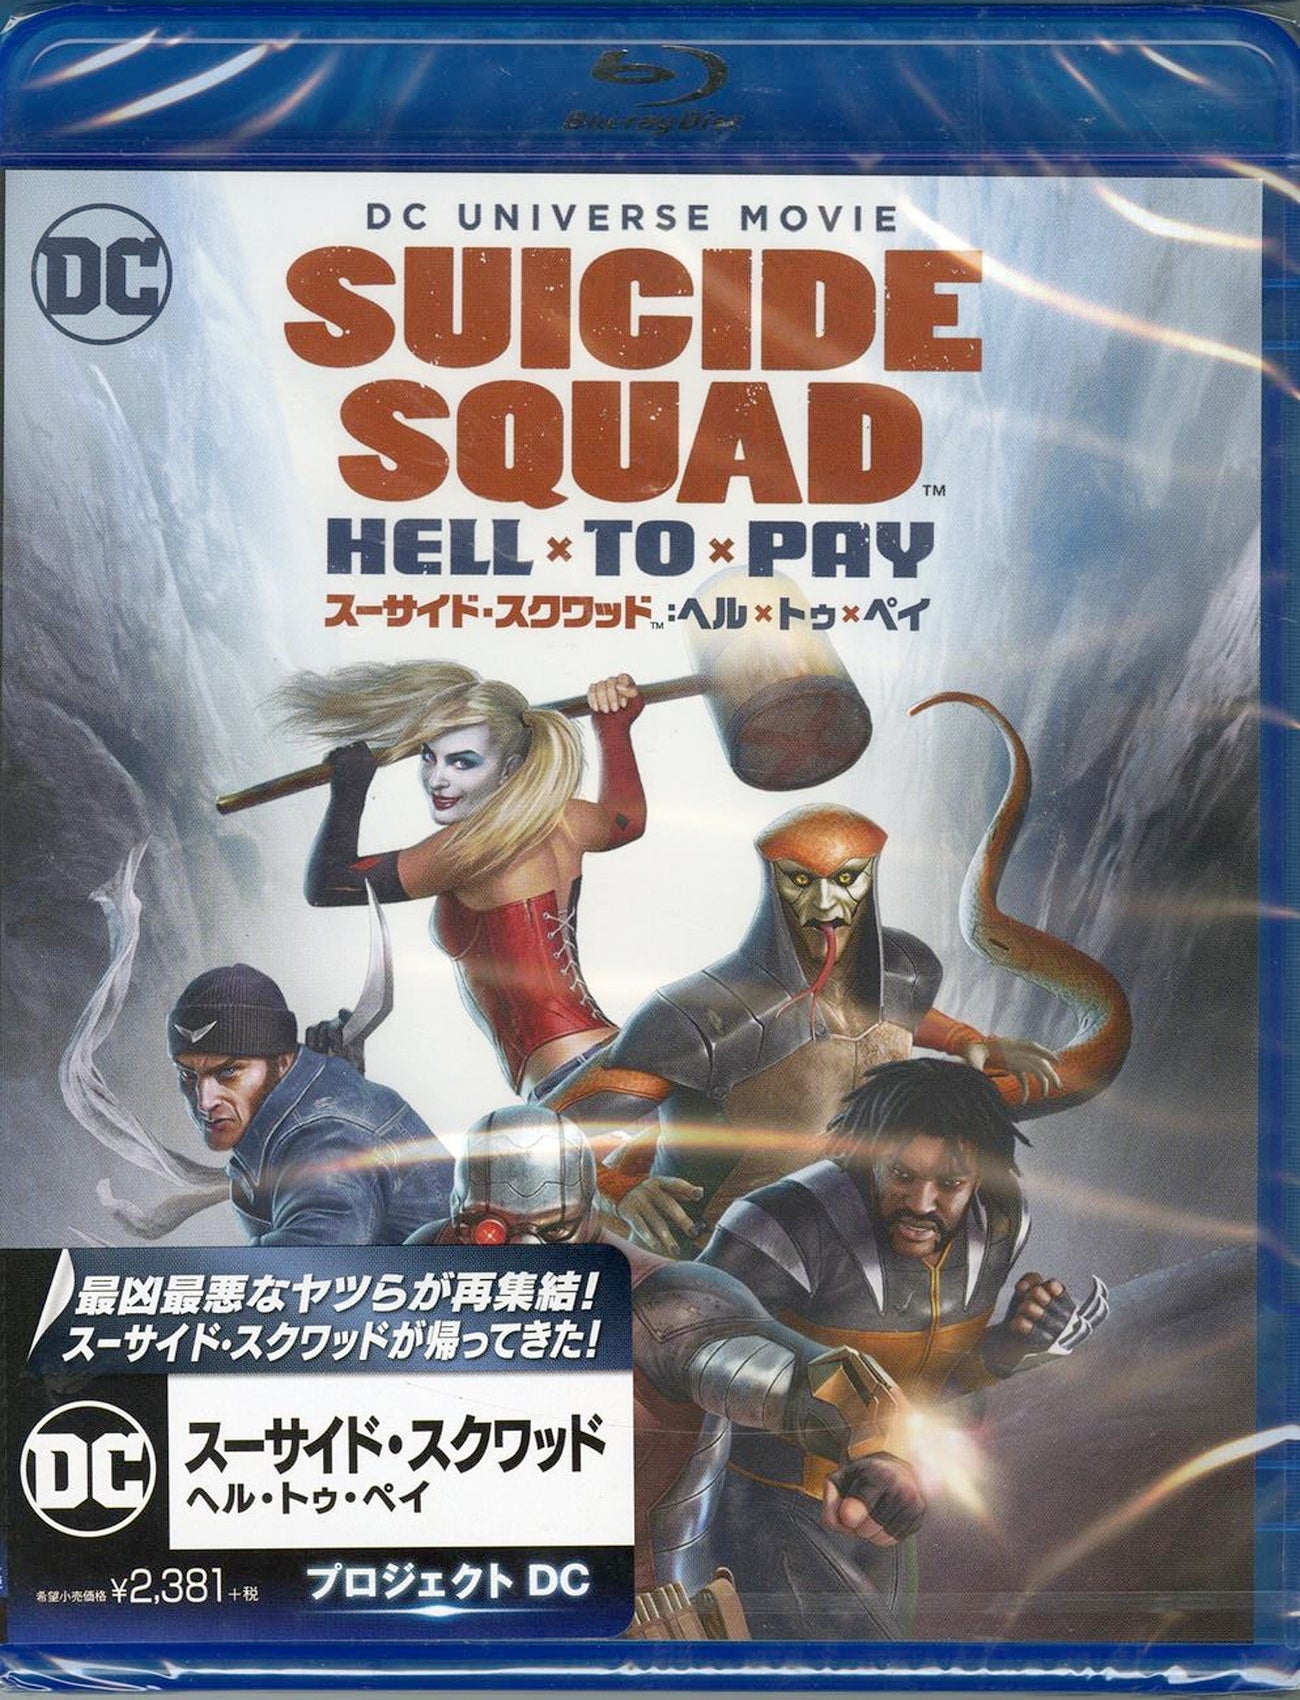 To　Blu-ray　Japan　Disc　Vinyl　Pay　CDs　Japan　–　Hell　Squad:　Suicide　Animation　Store